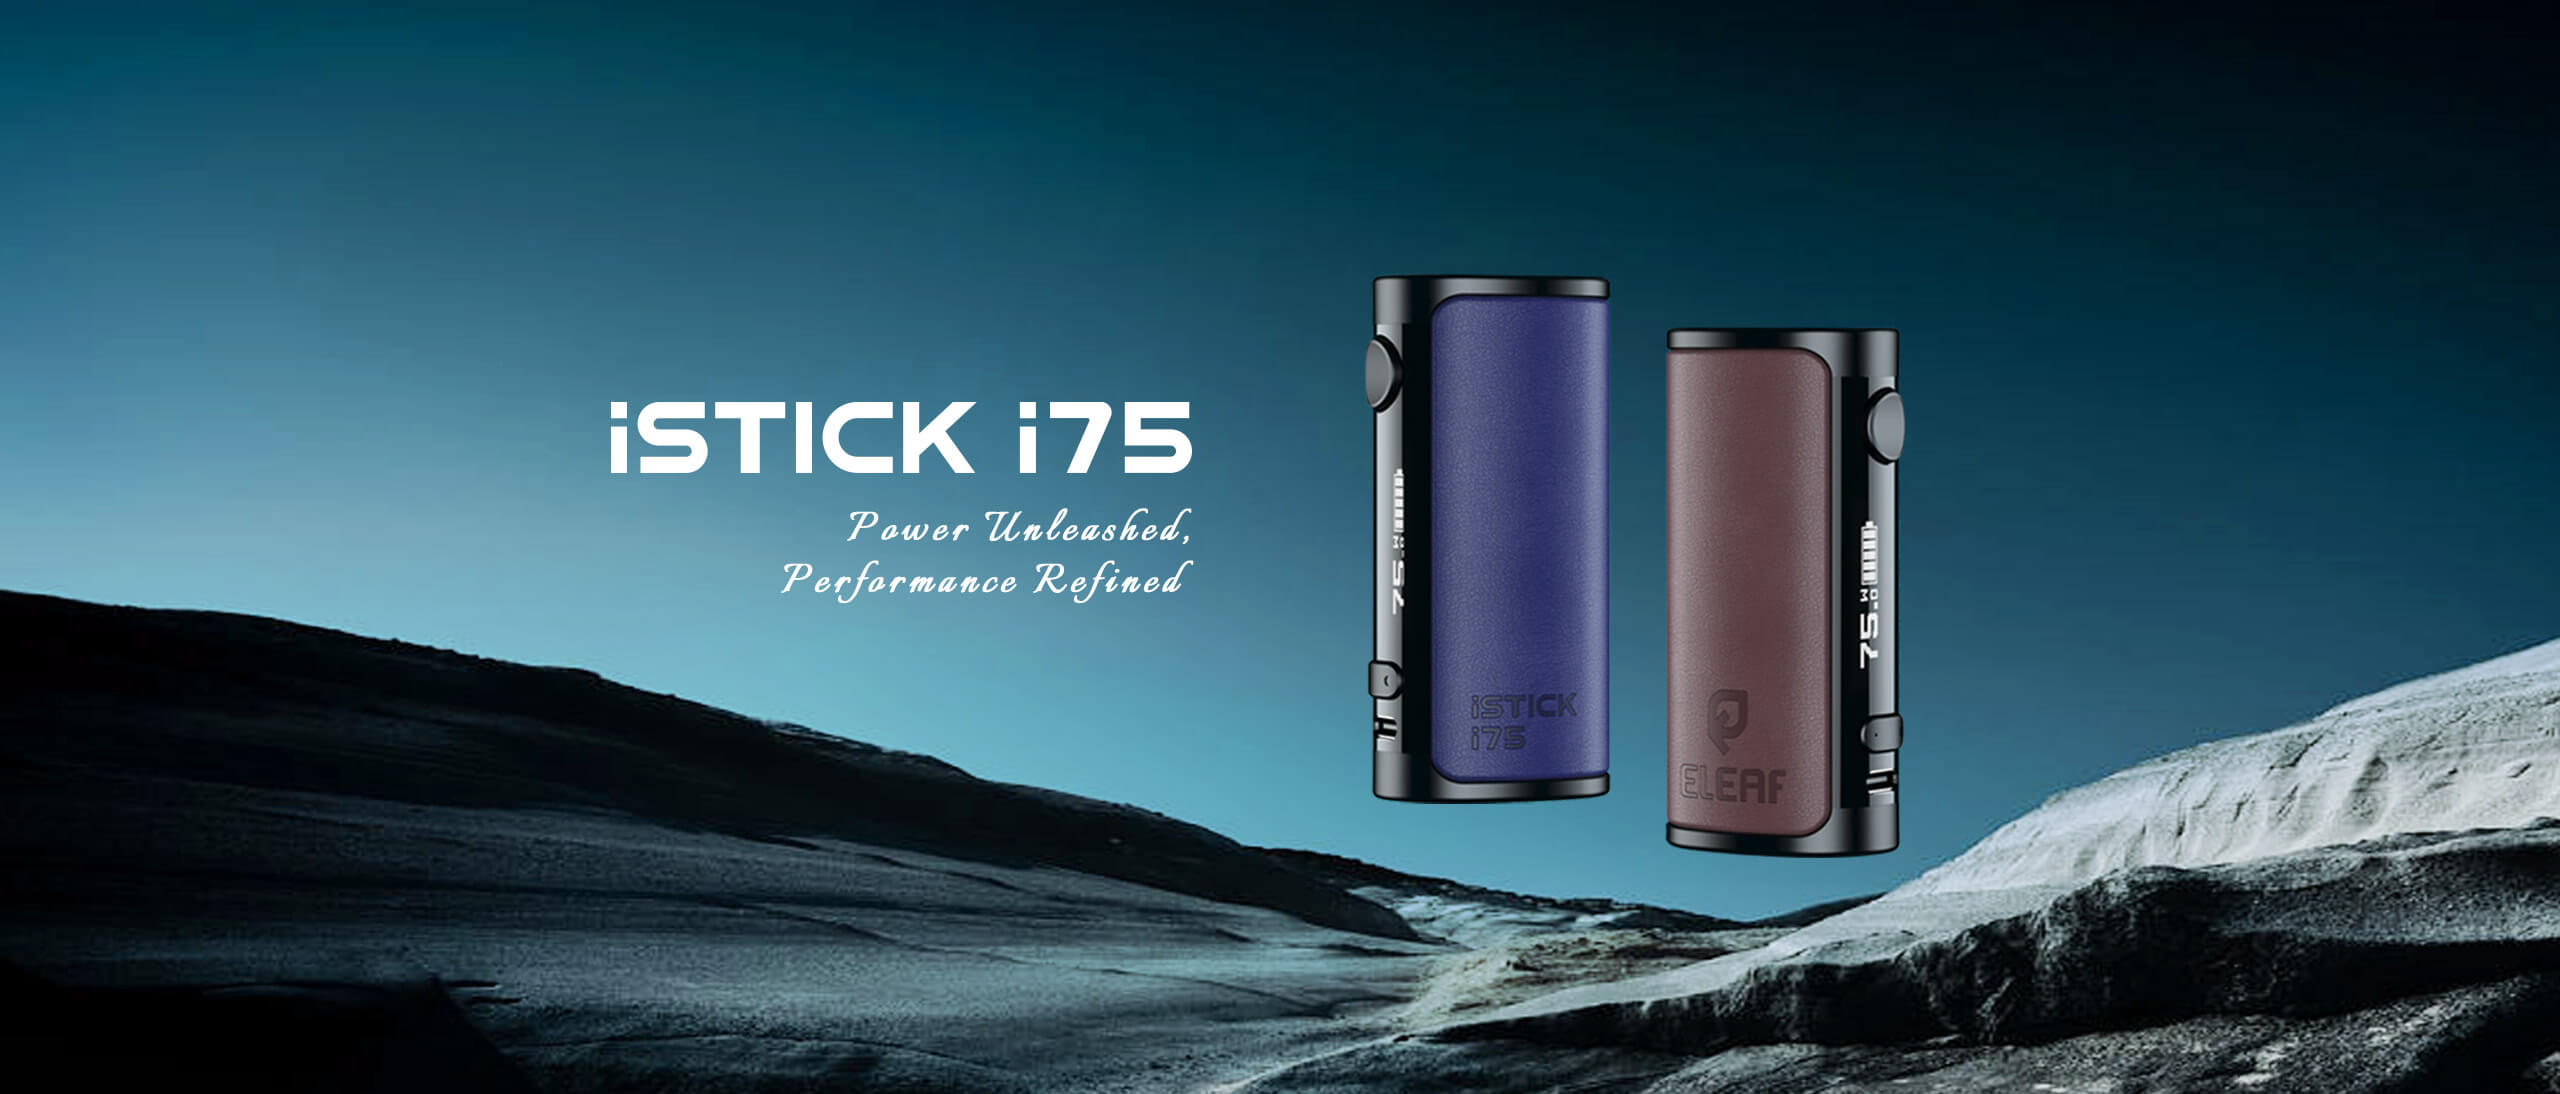 Eleaf iStick i75 Mod combines a powerful 75W output, a long-lasting 3000mAh battery, and a stylish leather design for an fantastic vaping experience.